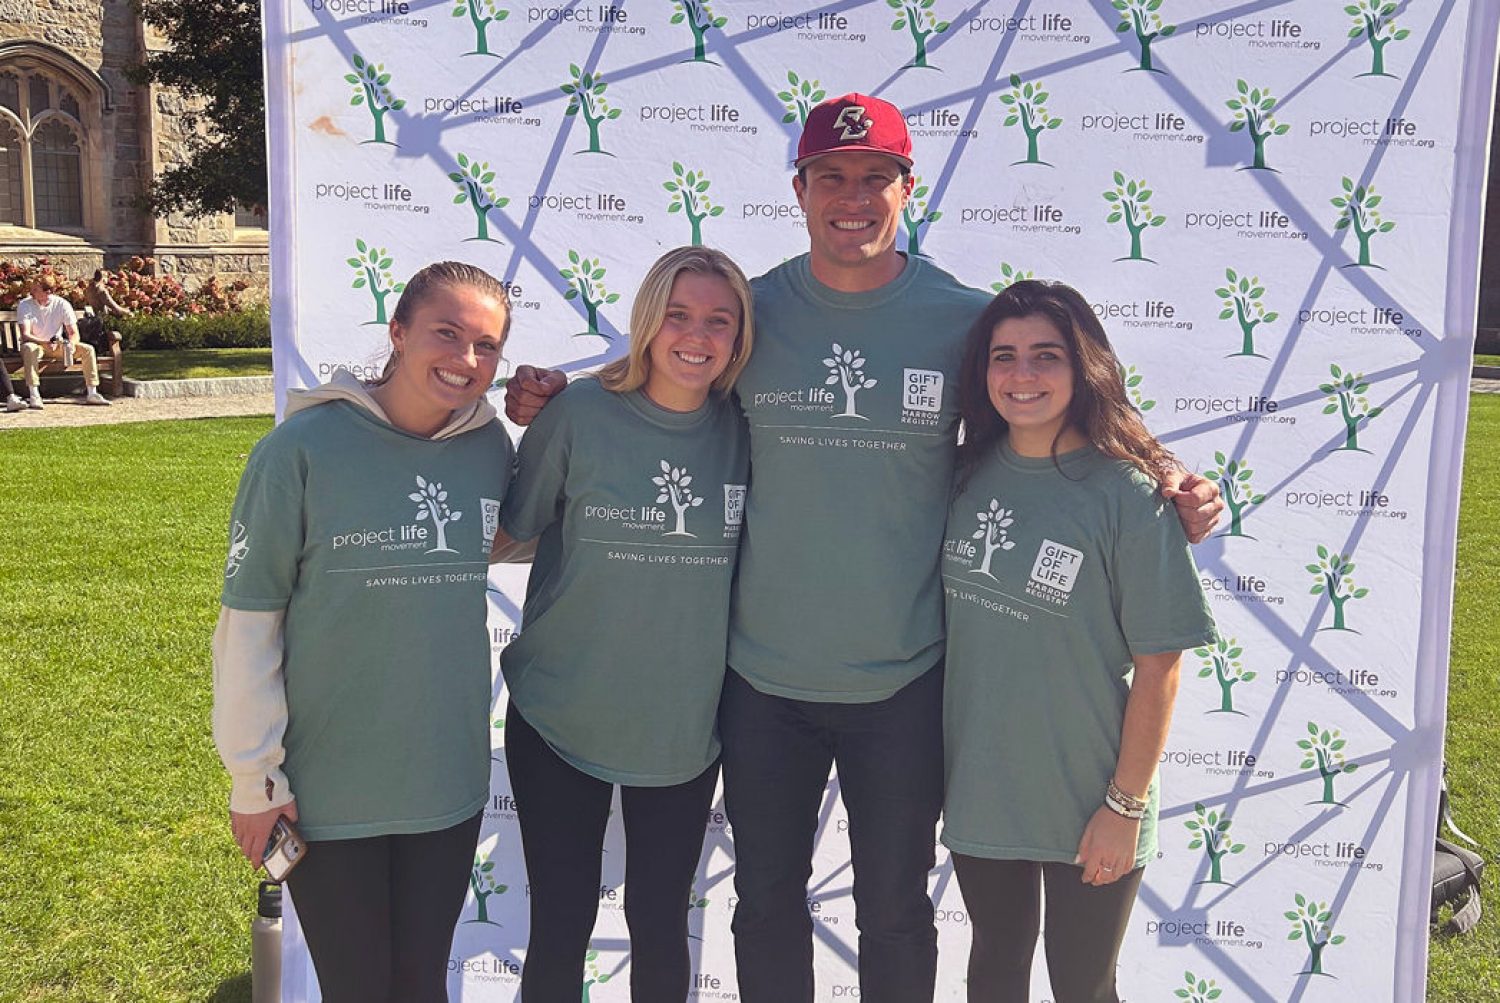 Luke Kuechly and three students in Project Life tees